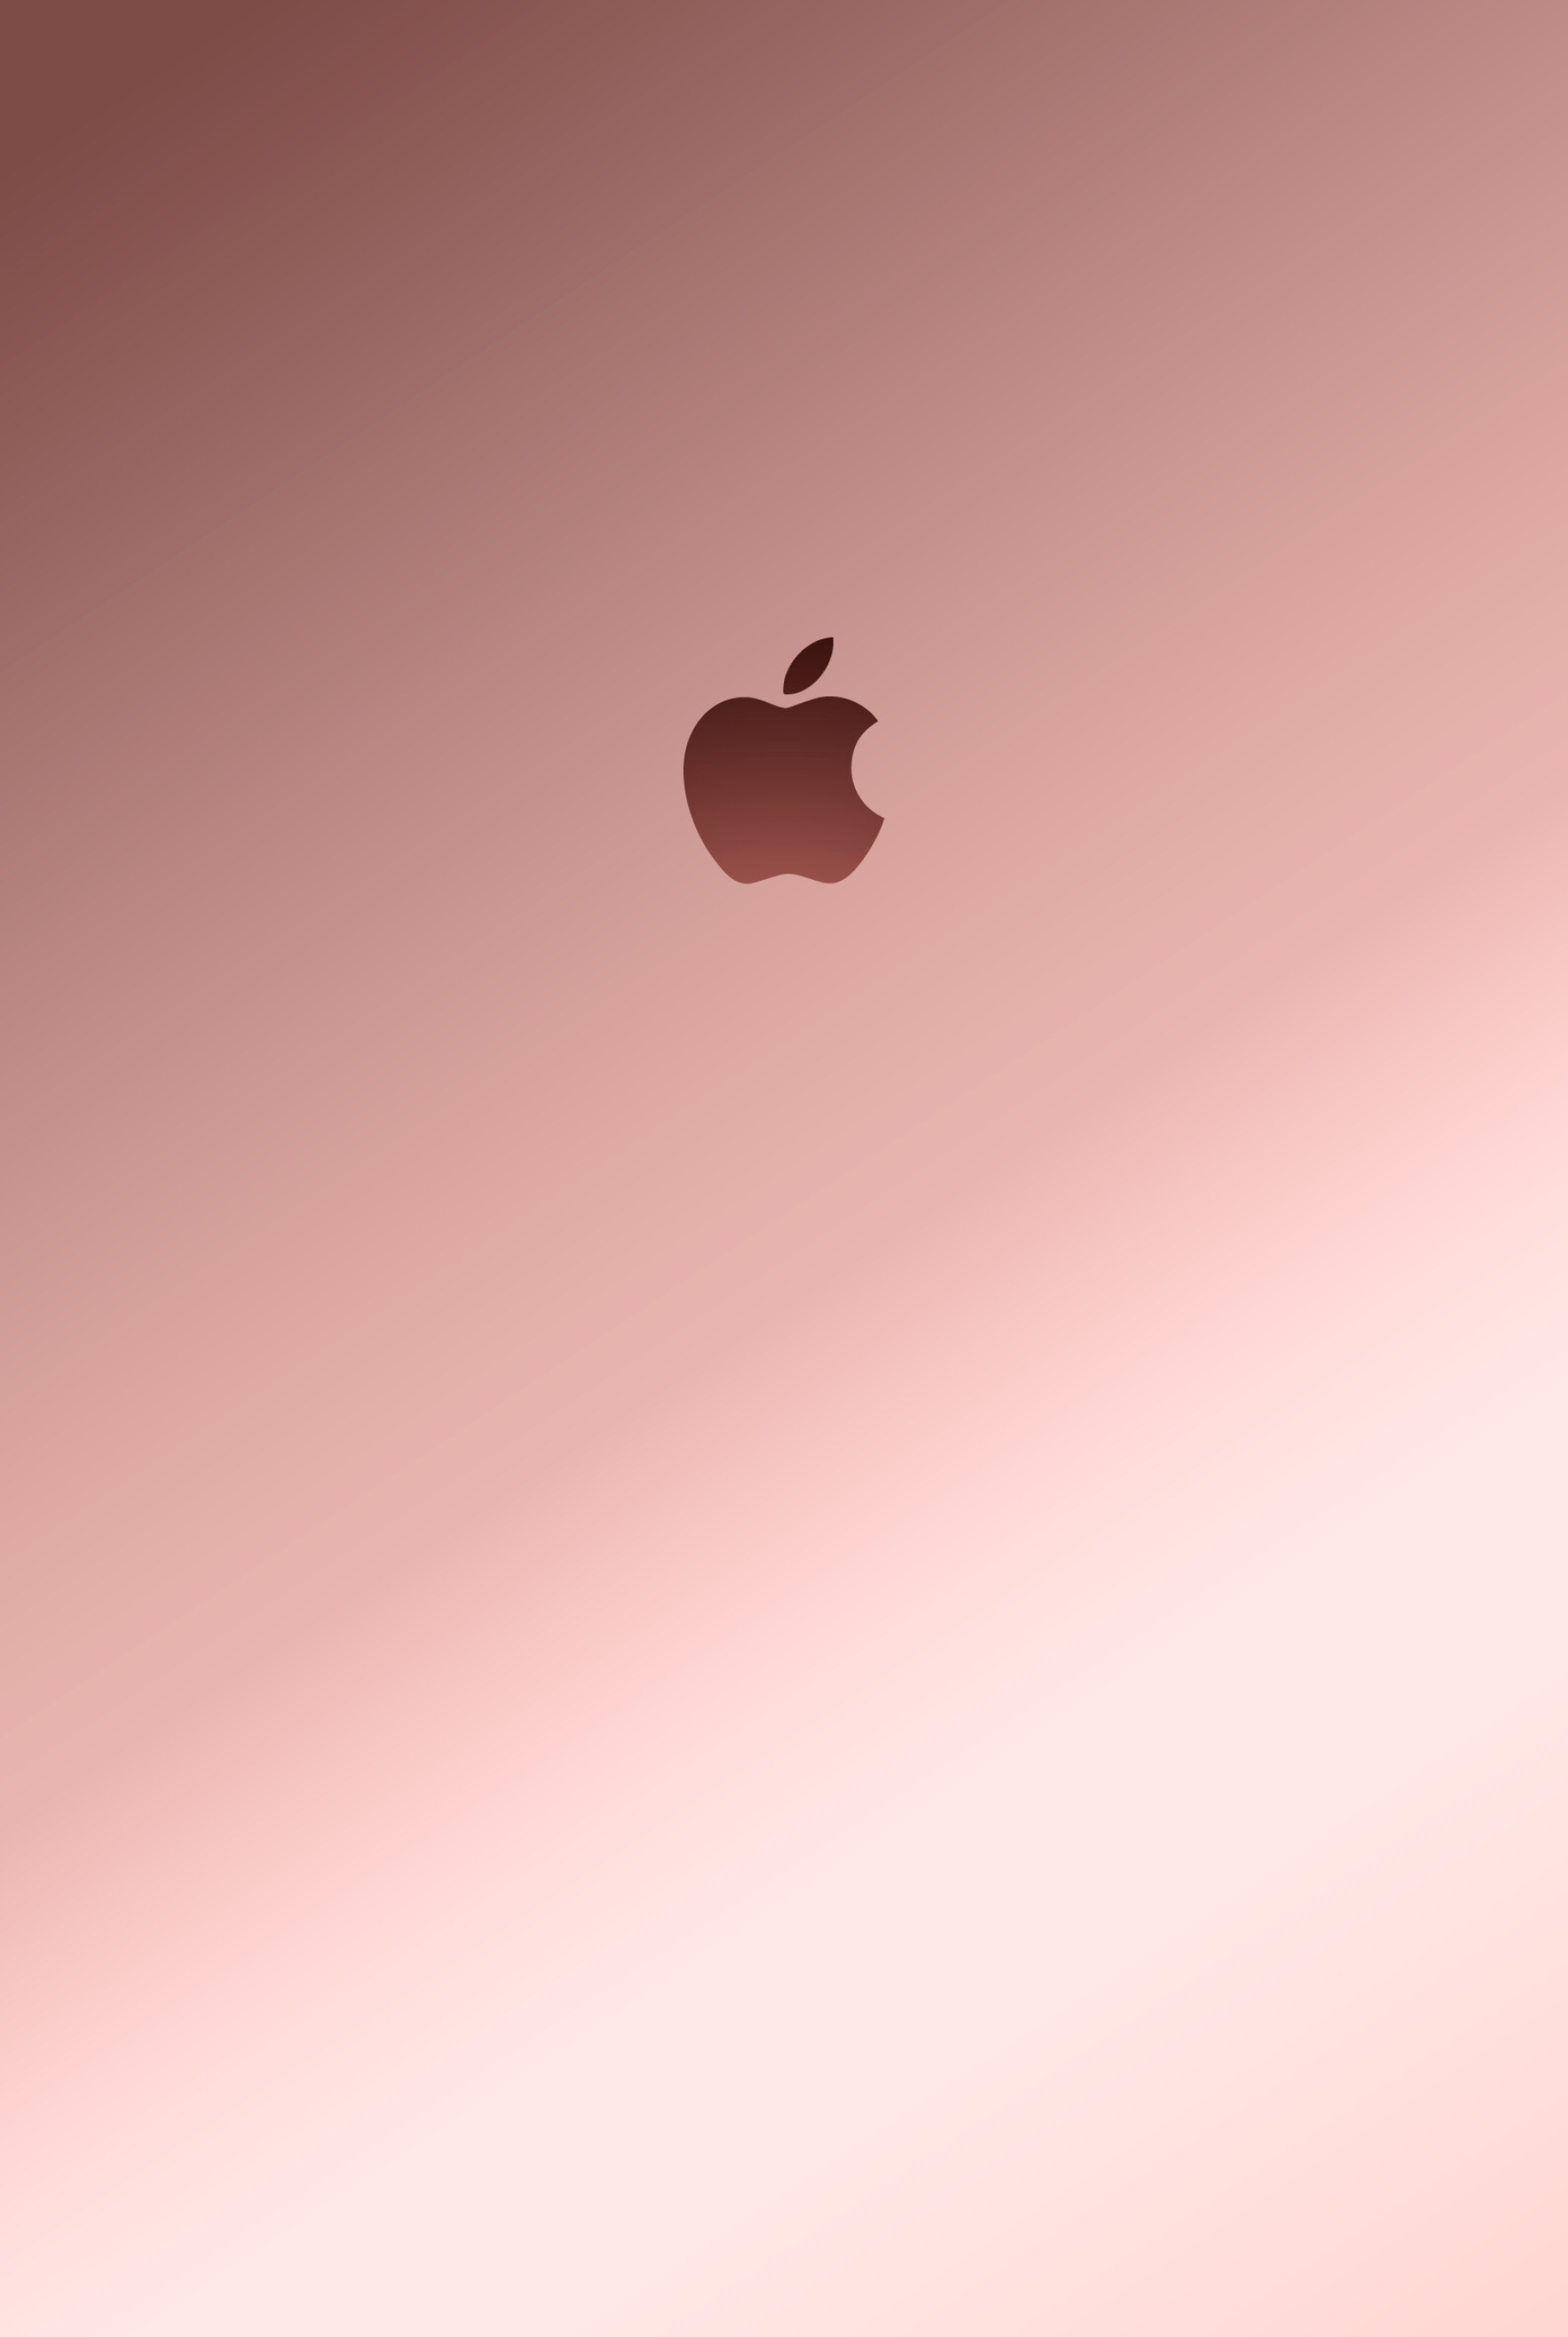 Apple Logo: One of the world’s top consumer electronics manufacturers. 1770x2640 HD Wallpaper.